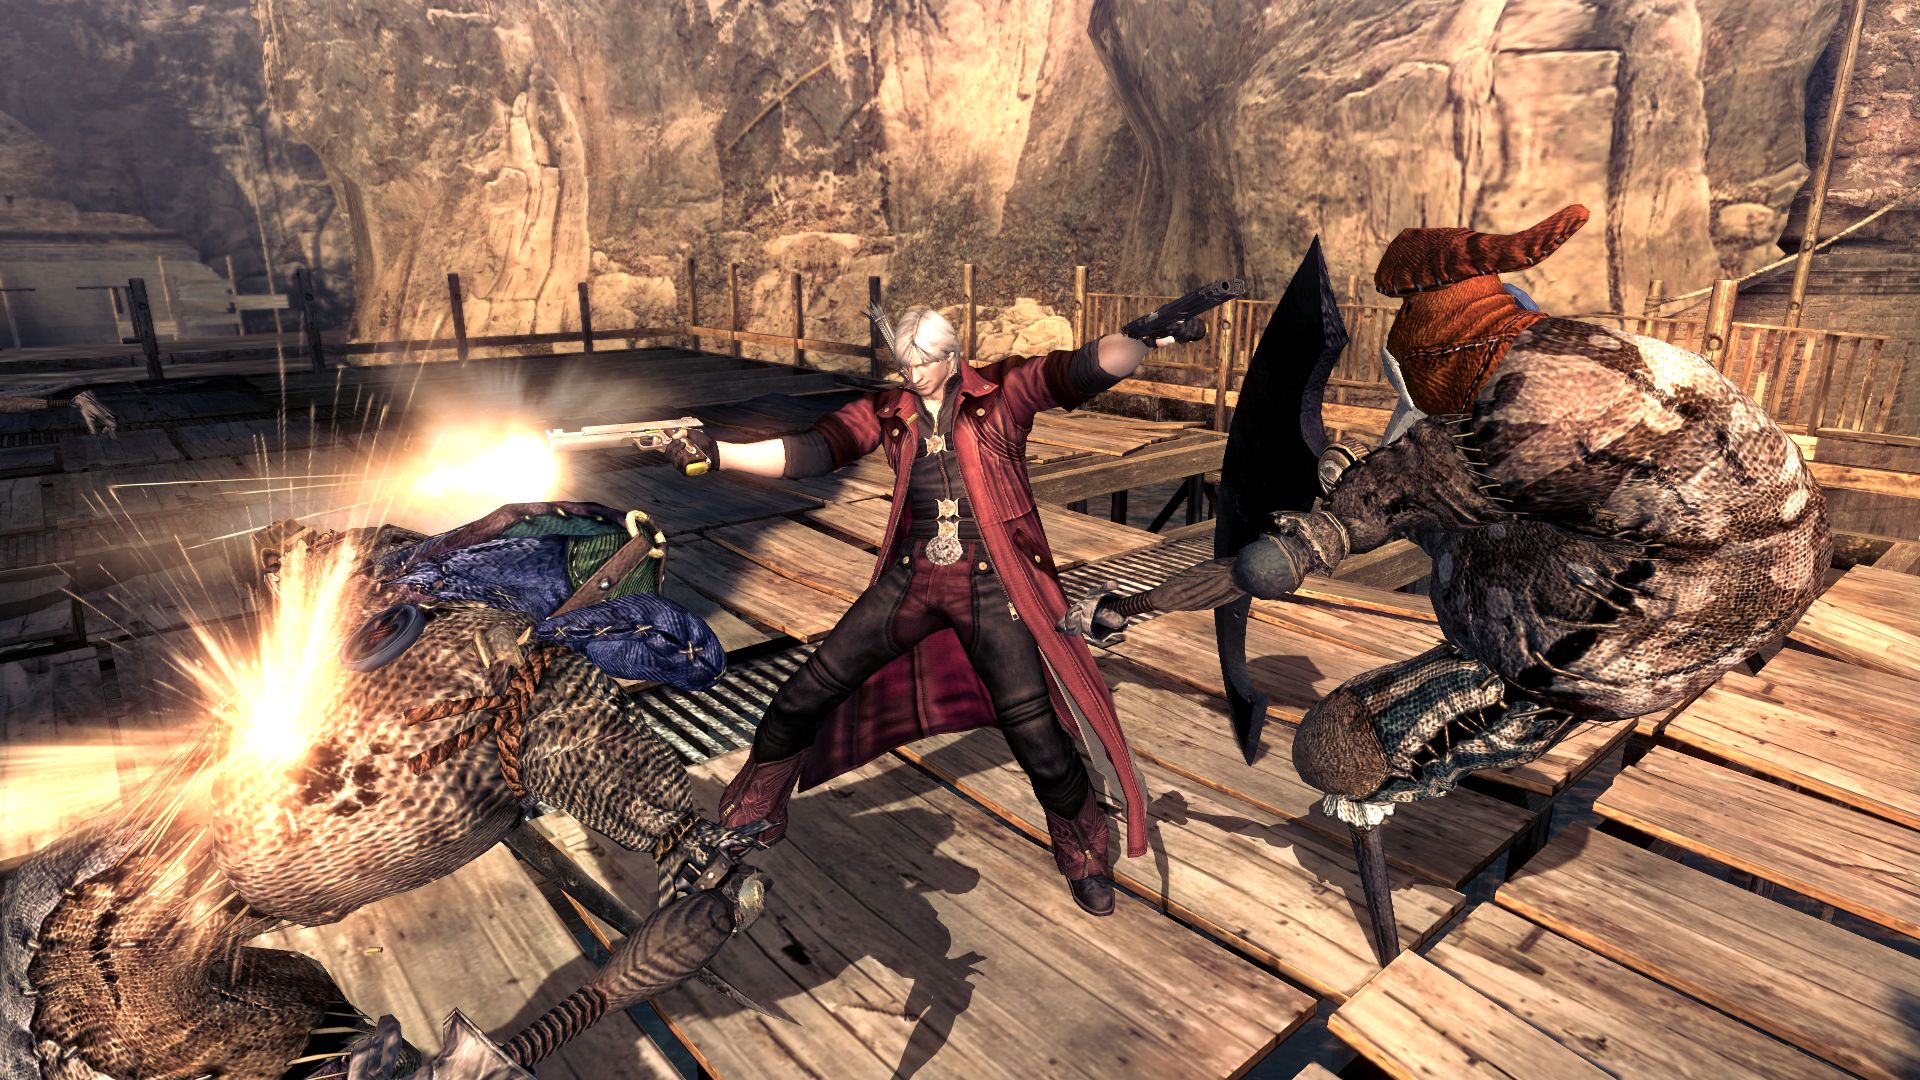 Download game devil may cry 3 pc